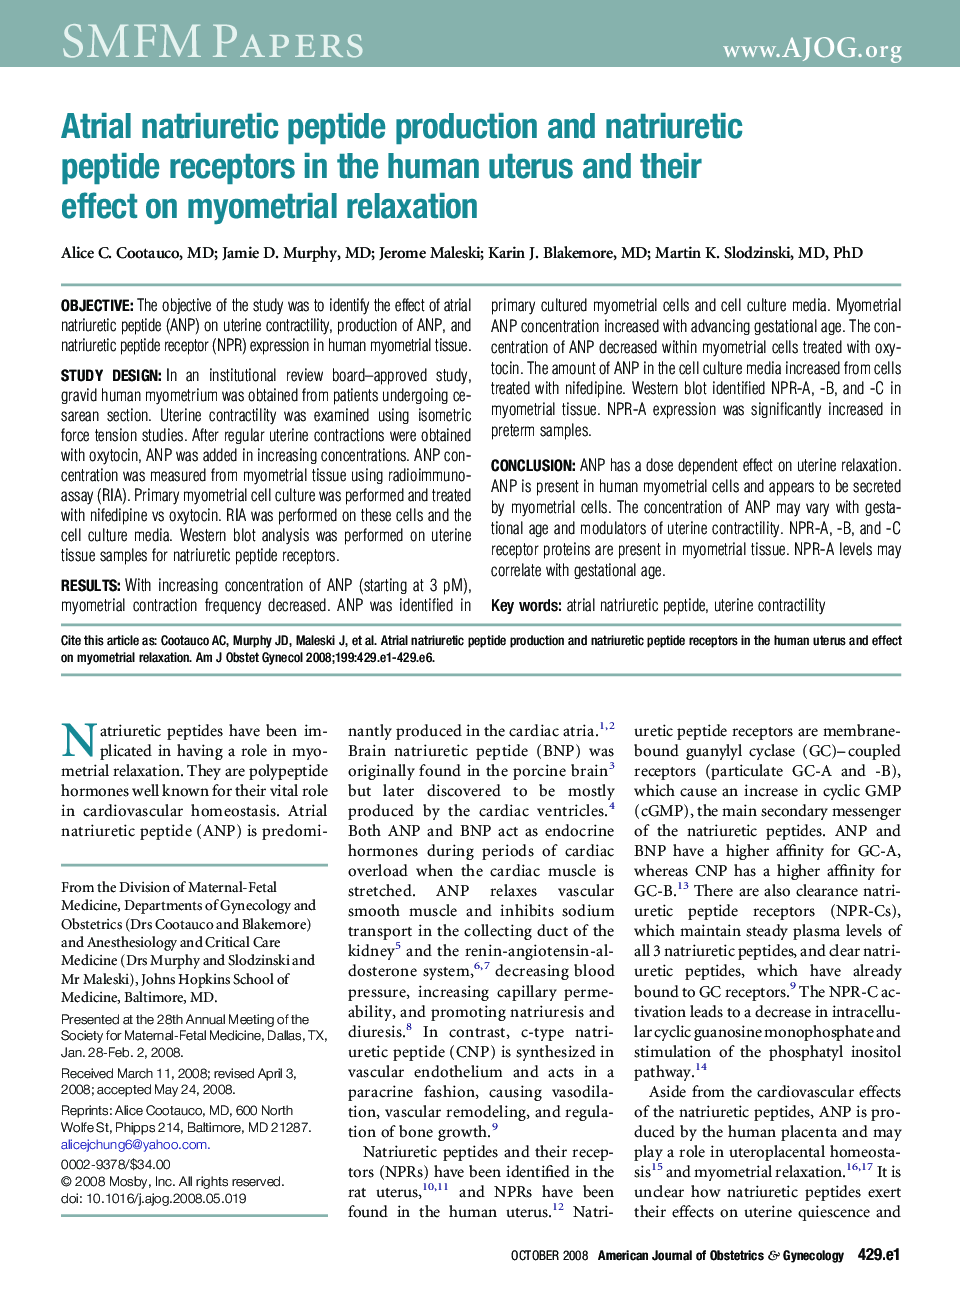 Atrial natriuretic peptide production and natriuretic peptide receptors in the human uterus and their effect on myometrial relaxation